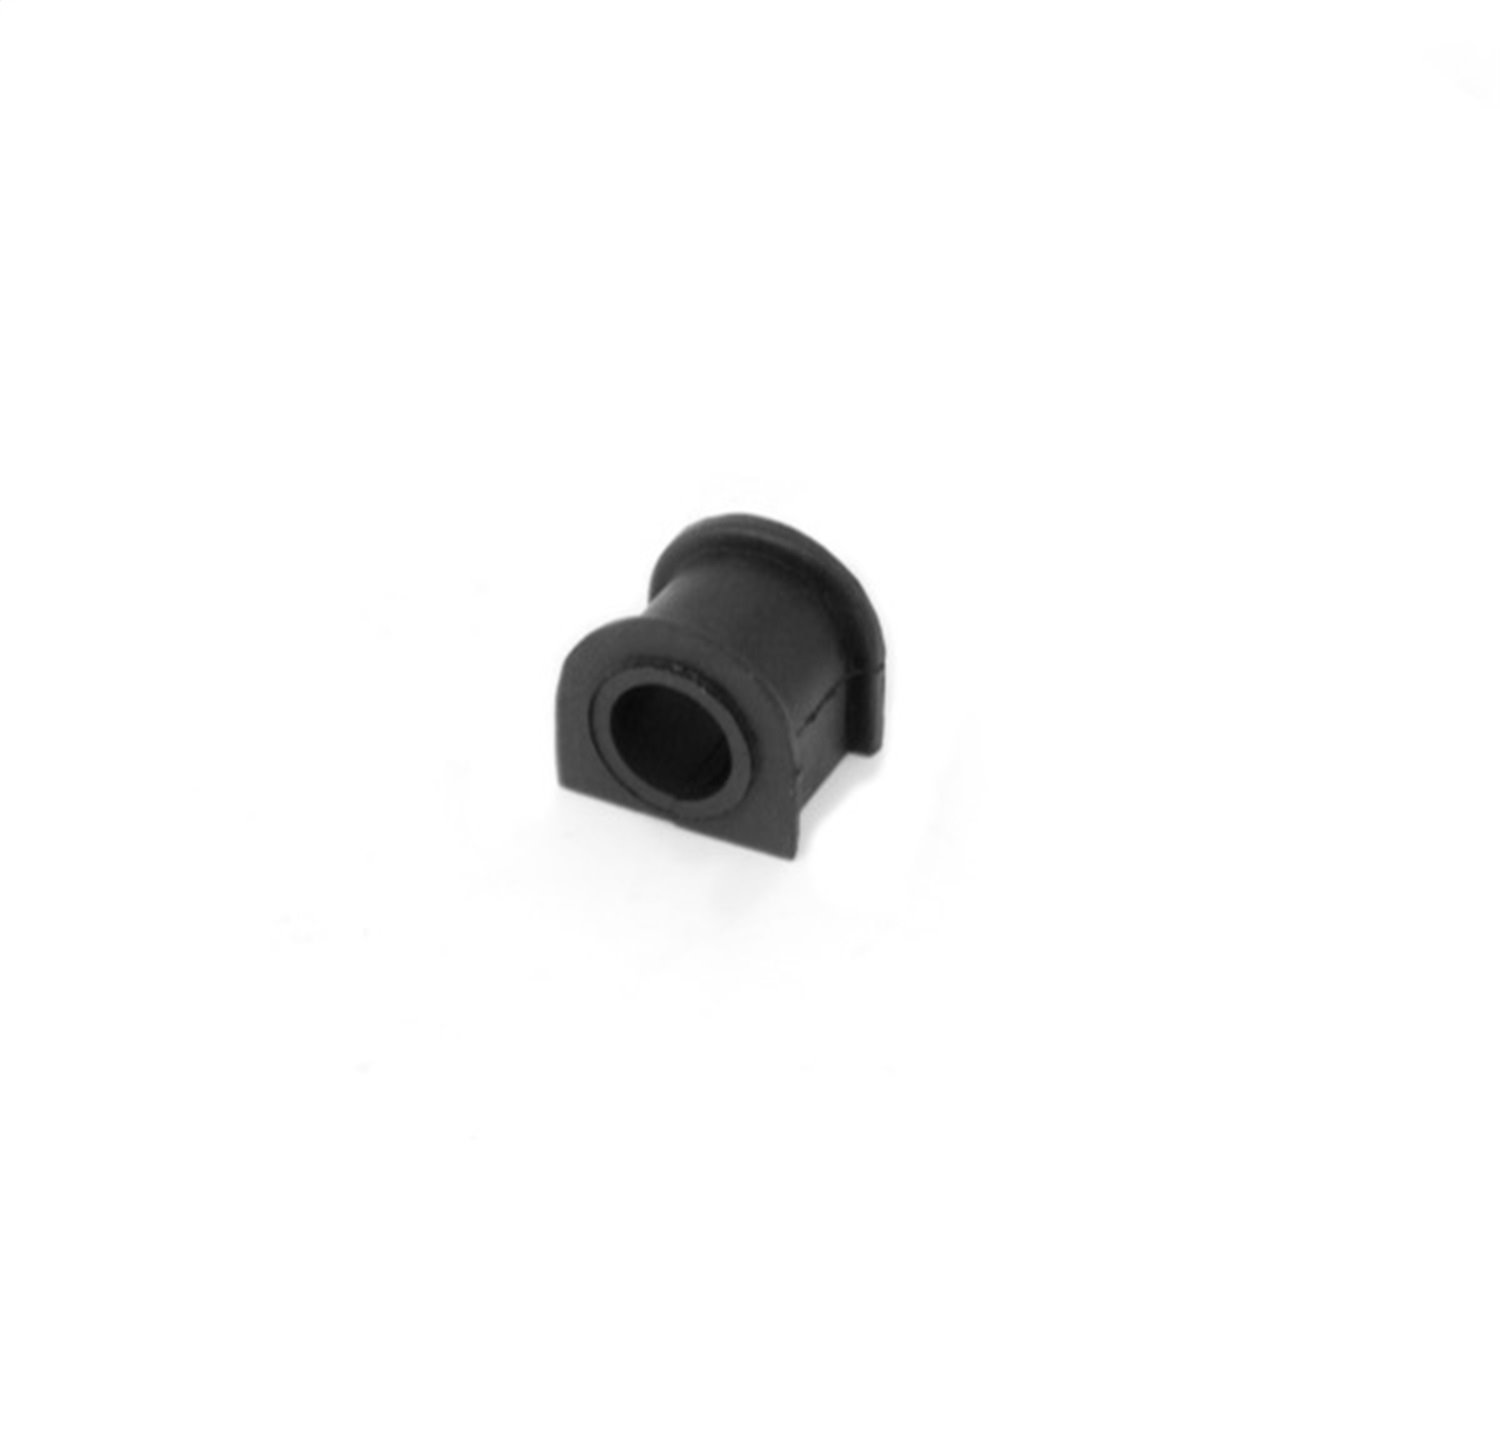 Replacement front sway bar bushing from Omix-ADA, Fits 90-96 Jeep Cherokee XJ with a 24mm sway bar... .